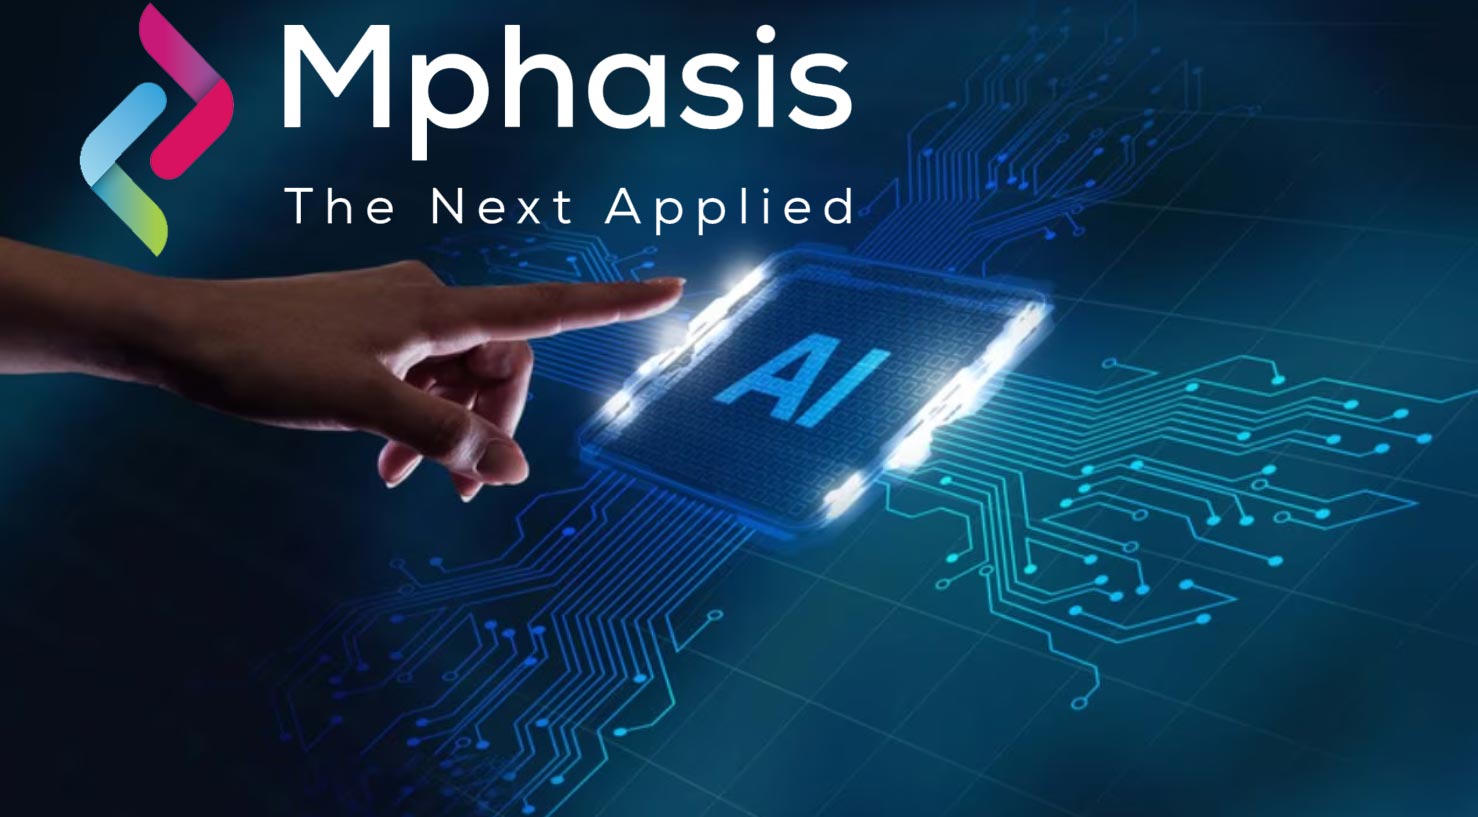 Mphasis has introduced smart document processing tool DeepInsights Doc AI